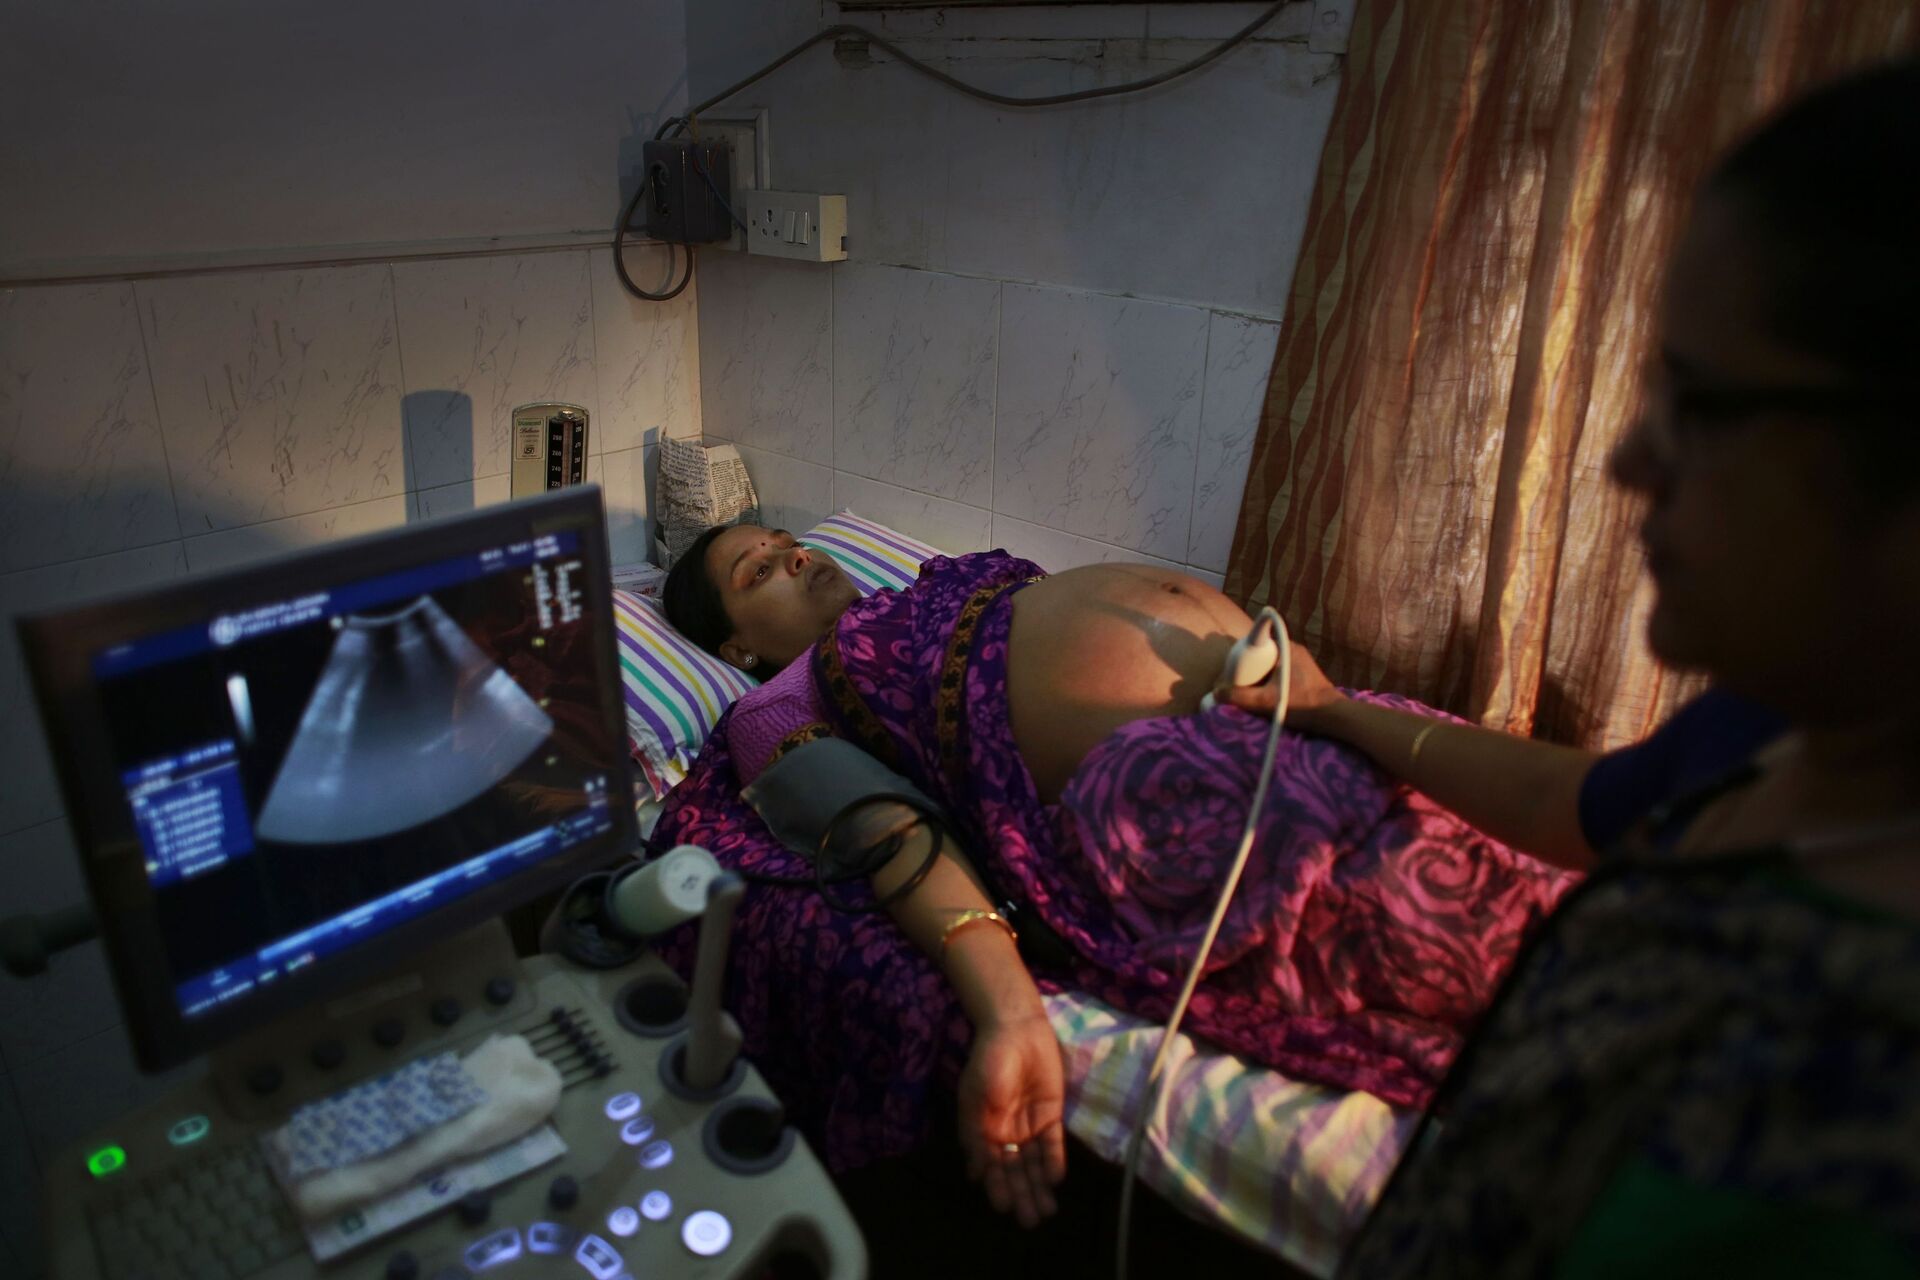 n Indian pregnant woman is examined by her gynecologist at a hospital in Gauhati, India, Friday, July 11, 2014 - Sputnik International, 1920, 17.09.2022